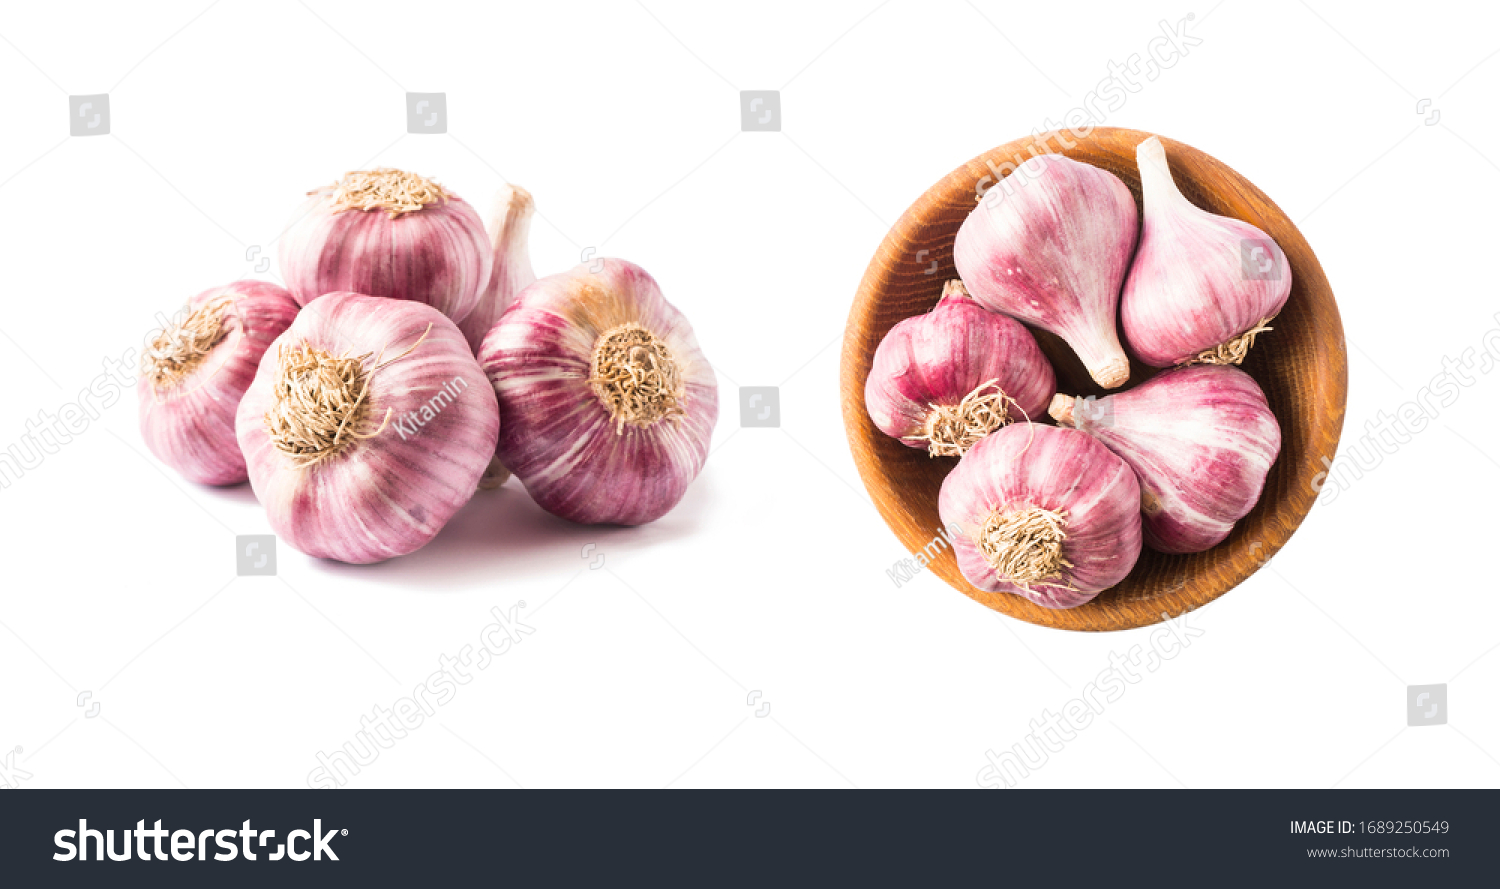 Garlic isolated on white background. Garlic Isolated on white background Clipping Path. Garlic press and garlic on white background. Top view. Garlics from different angles on white. #1689250549